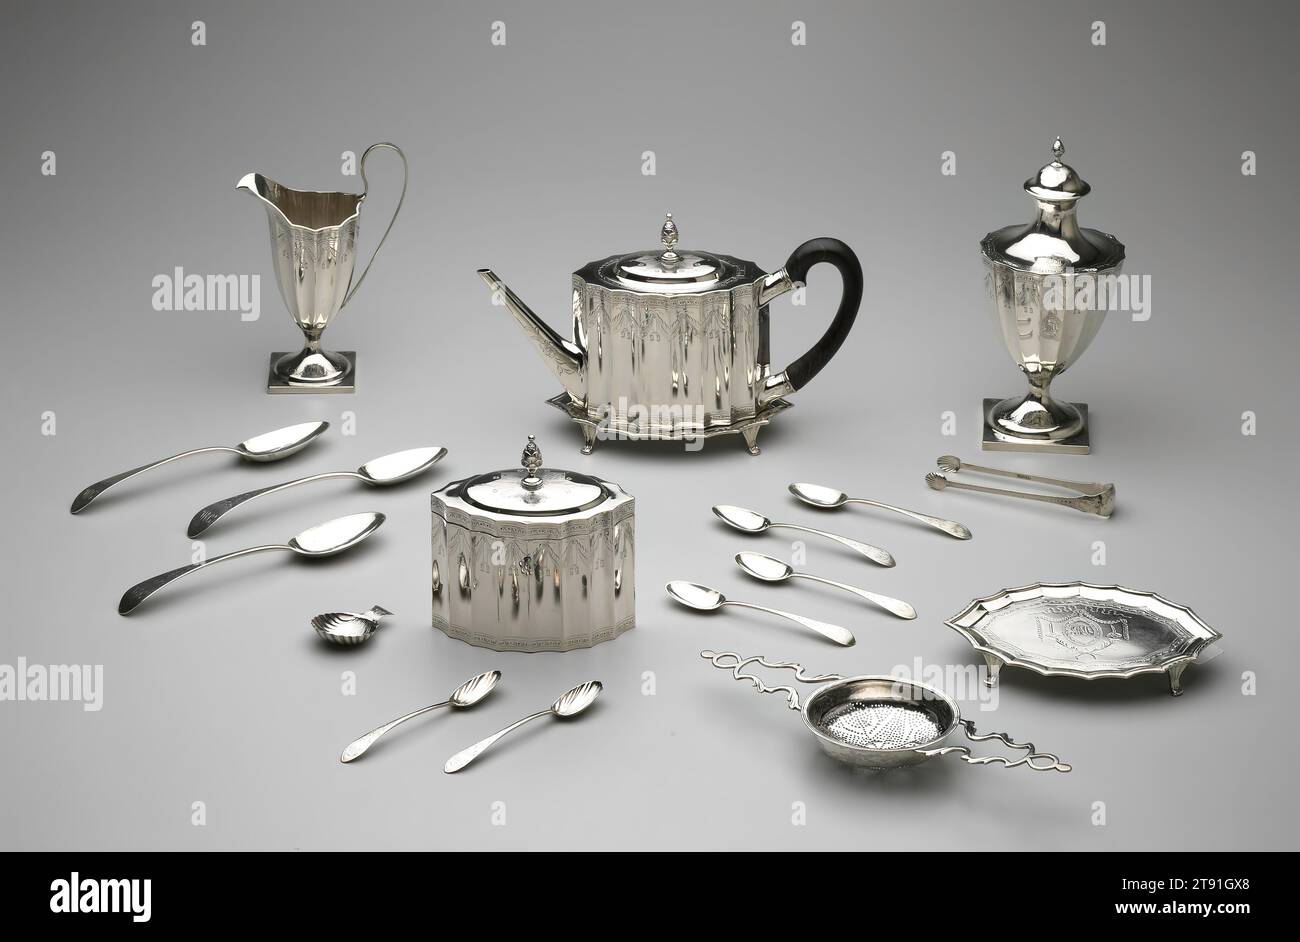 https://c8.alamy.com/comp/2T91GX8/sugar-tongs-from-a-tea-service-1797-paul-revere-jr-american-17341818-5-12-in-1397-cm-silver-and-wood-united-states-federal-the-most-complete-revere-service-known-this-set-was-made-for-a-boston-merchant-and-his-wife-john-and-mehitable-templeman-it-includes-one-of-only-two-tea-caddies-made-by-revere-the-locked-boxes-held-loose-tea-an-expensive-and-fashionable-commodity-the-shell-shaped-spoon-was-used-for-measuring-tea-and-the-sieve-was-used-for-straining-punch-a-beverage-often-served-along-with-tea-the-second-stand-may-have-been-used-as-a-tray-for-spoons-2T91GX8.jpg